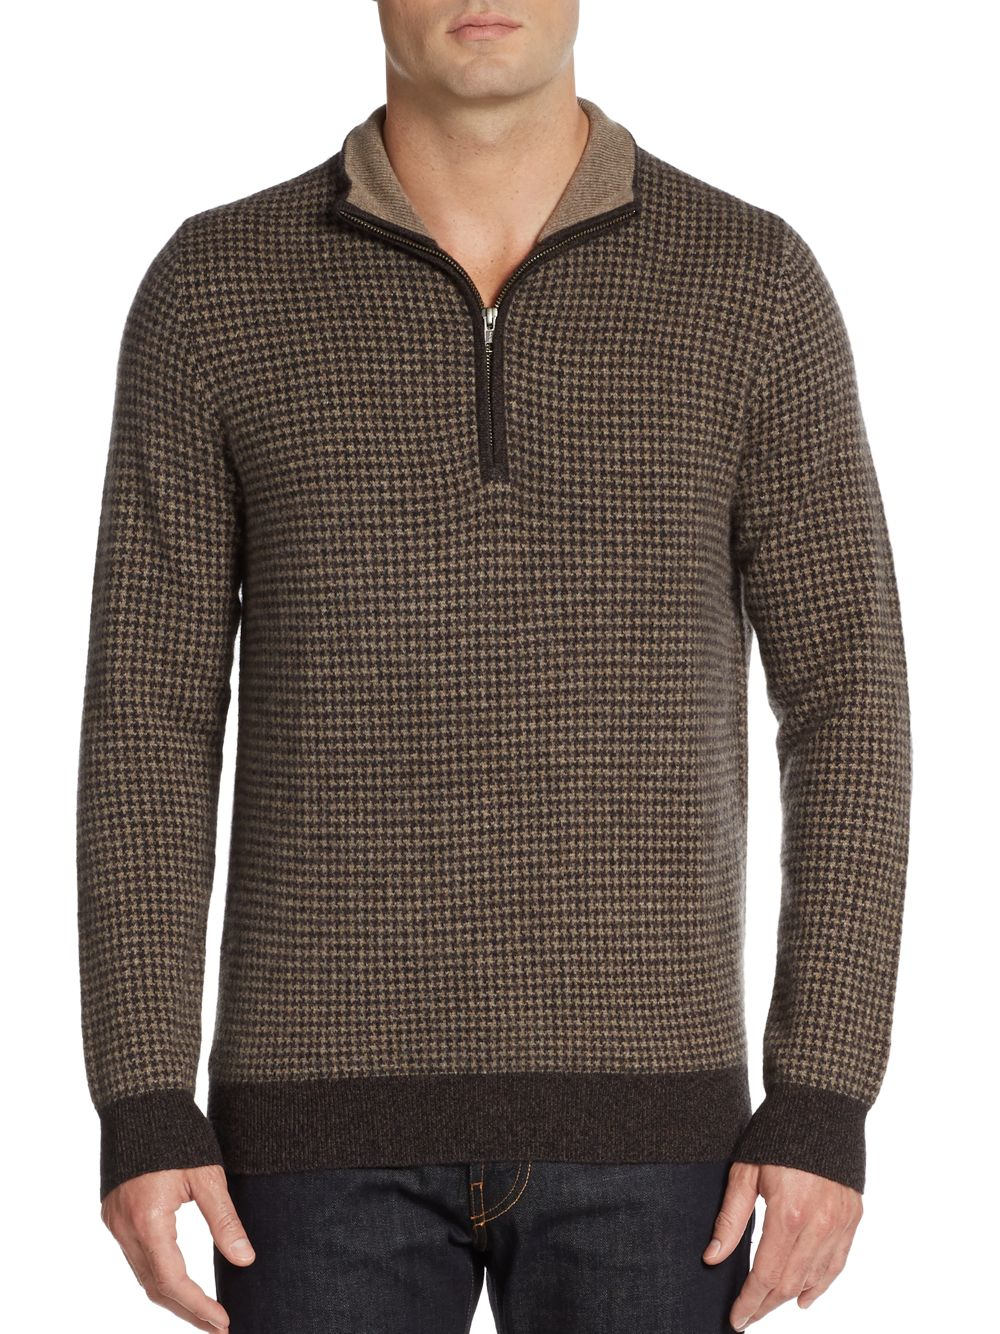 Lyst - Saks Fifth Avenue Zip-placket Houndstooth Cashmere Sweater in ...